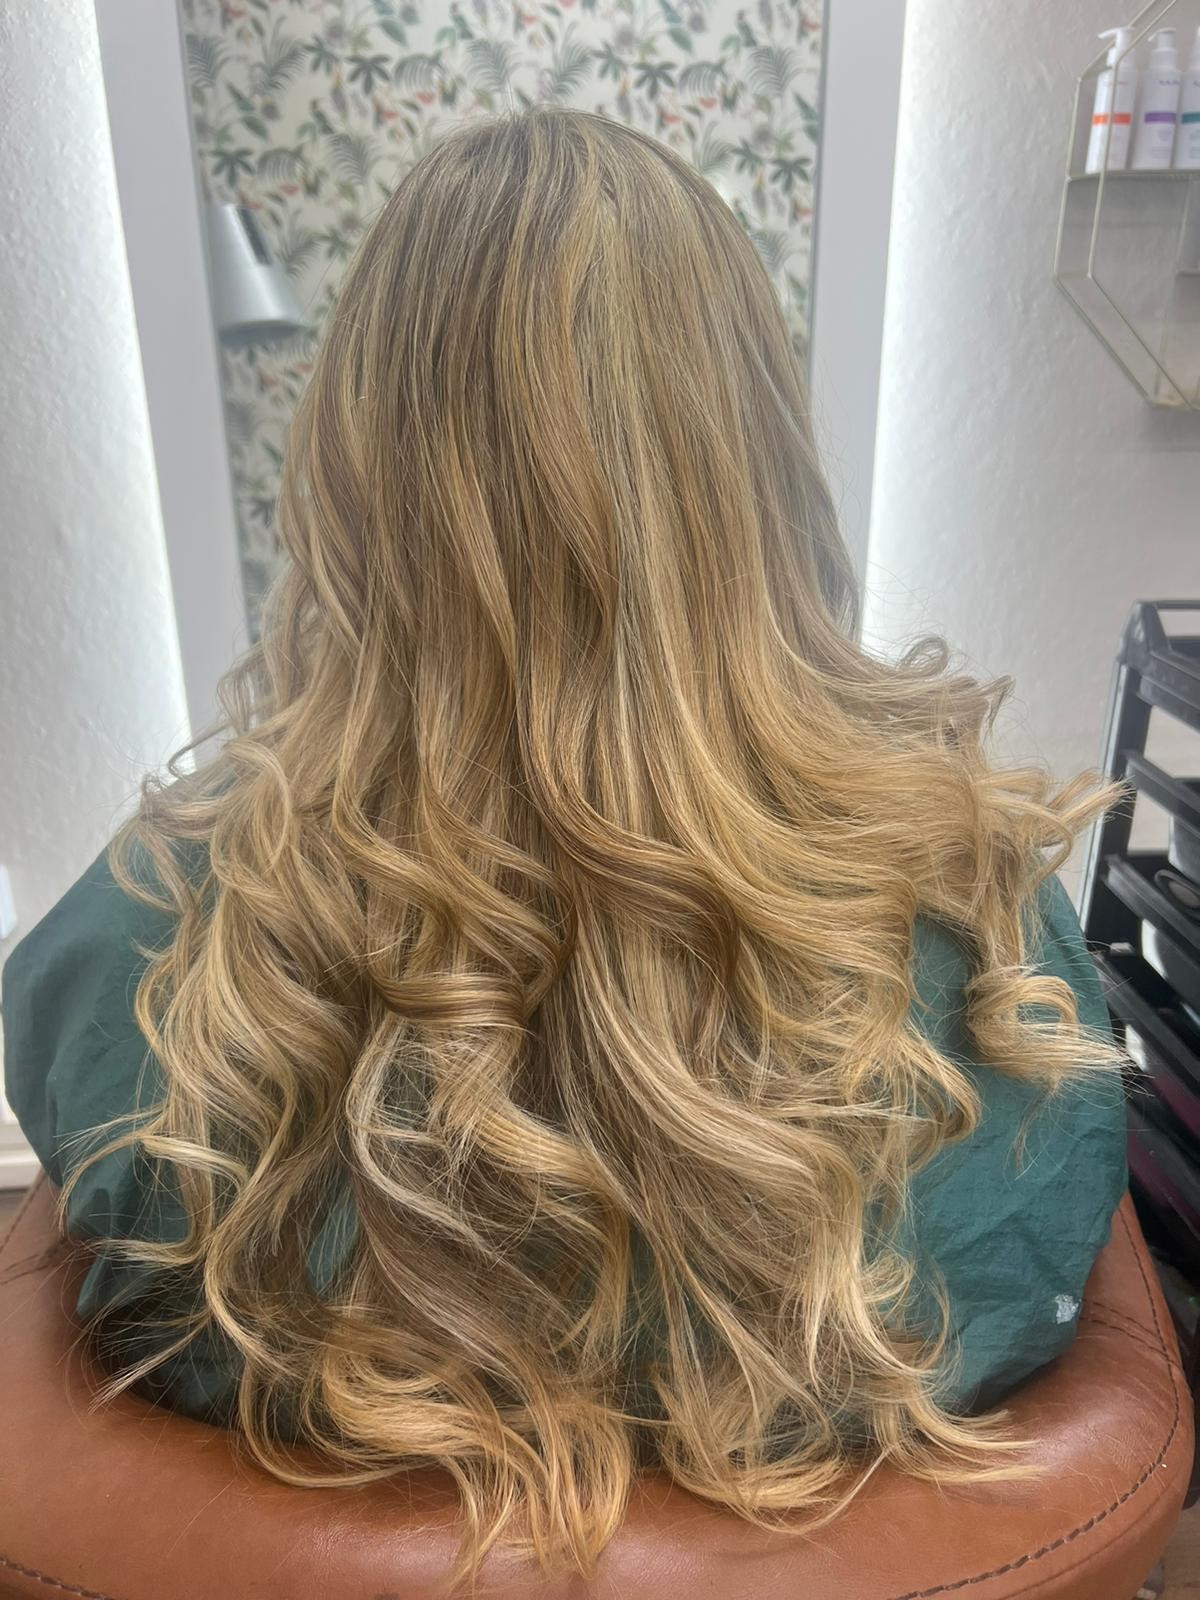 Full head highlights and curls 